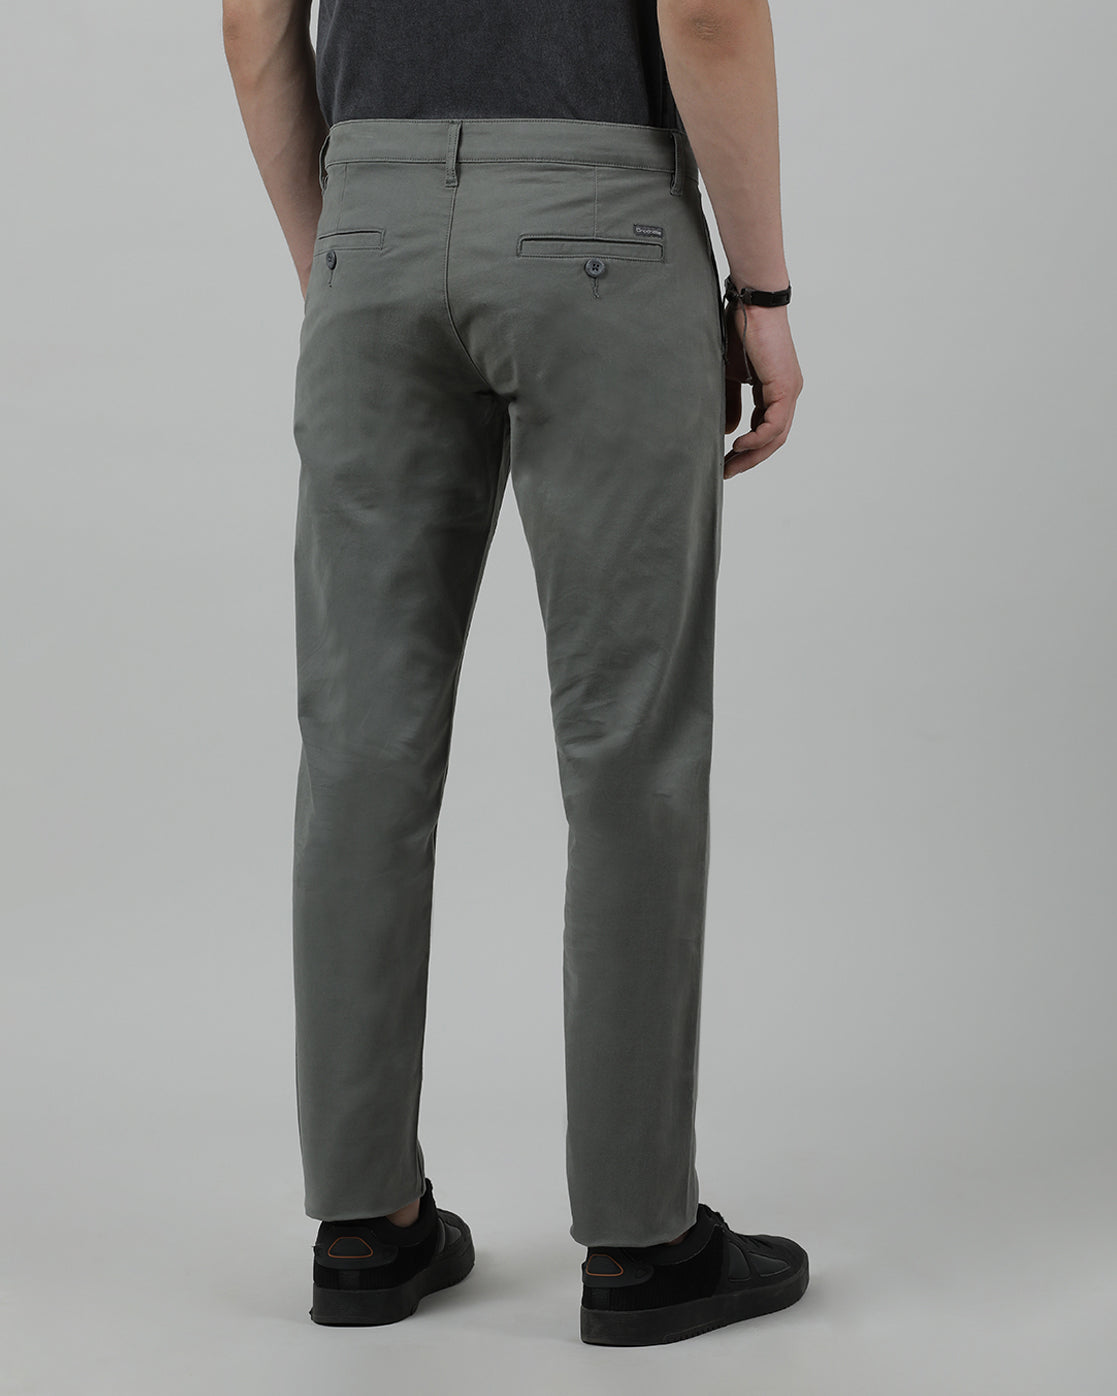 Casual Slim Fit Solid Military Green Trousers for Men